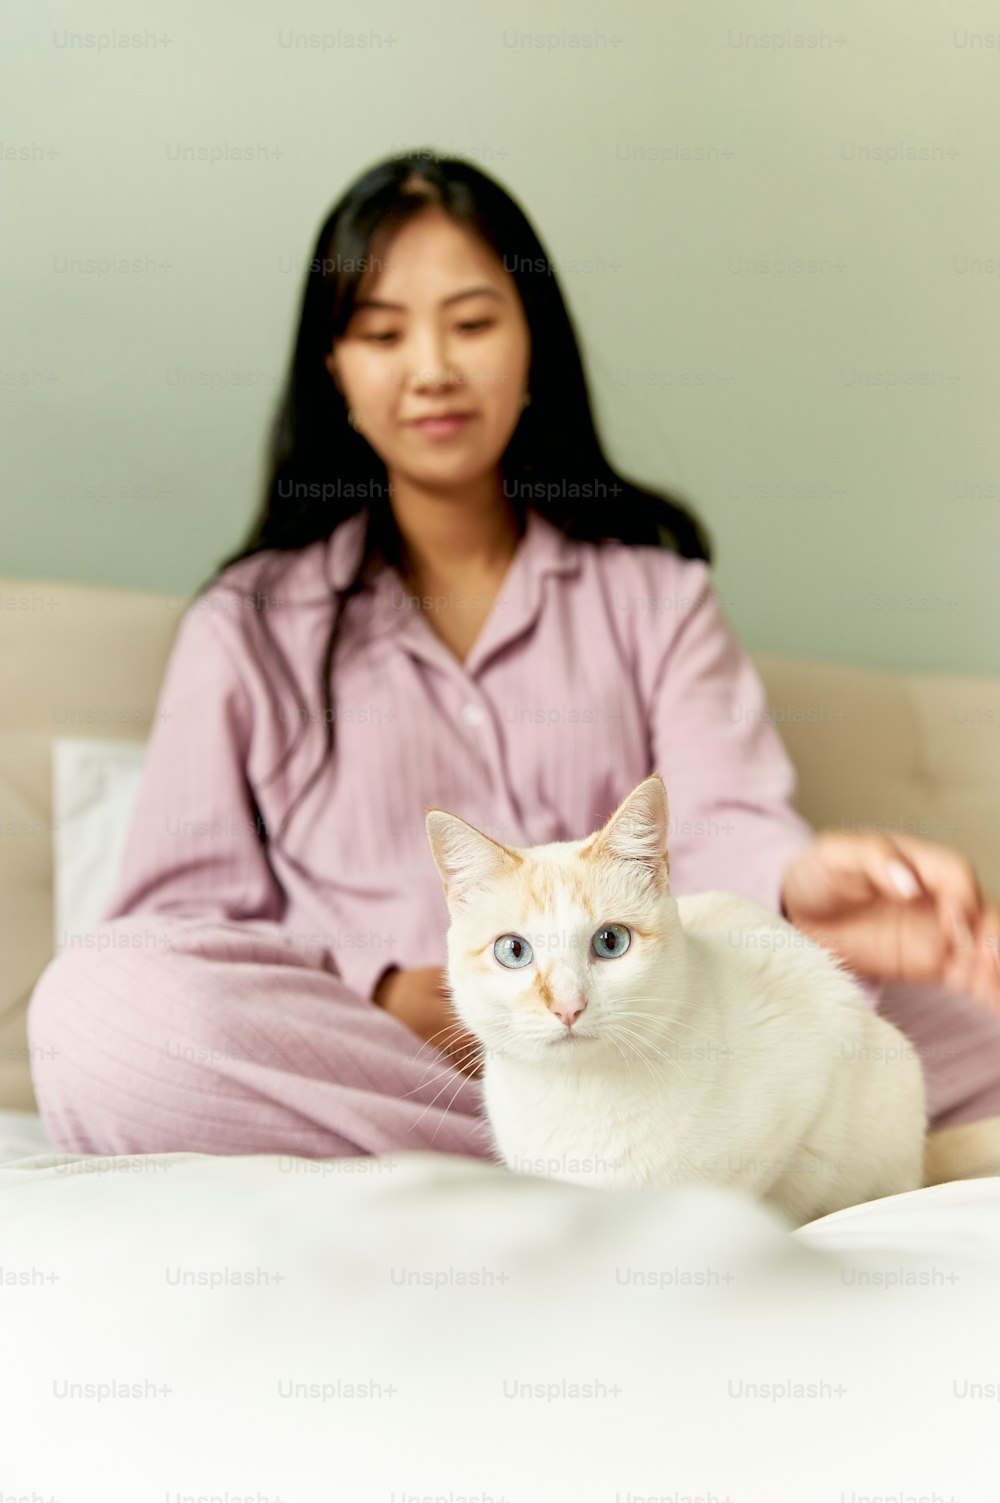 a woman sitting on a bed with a white cat